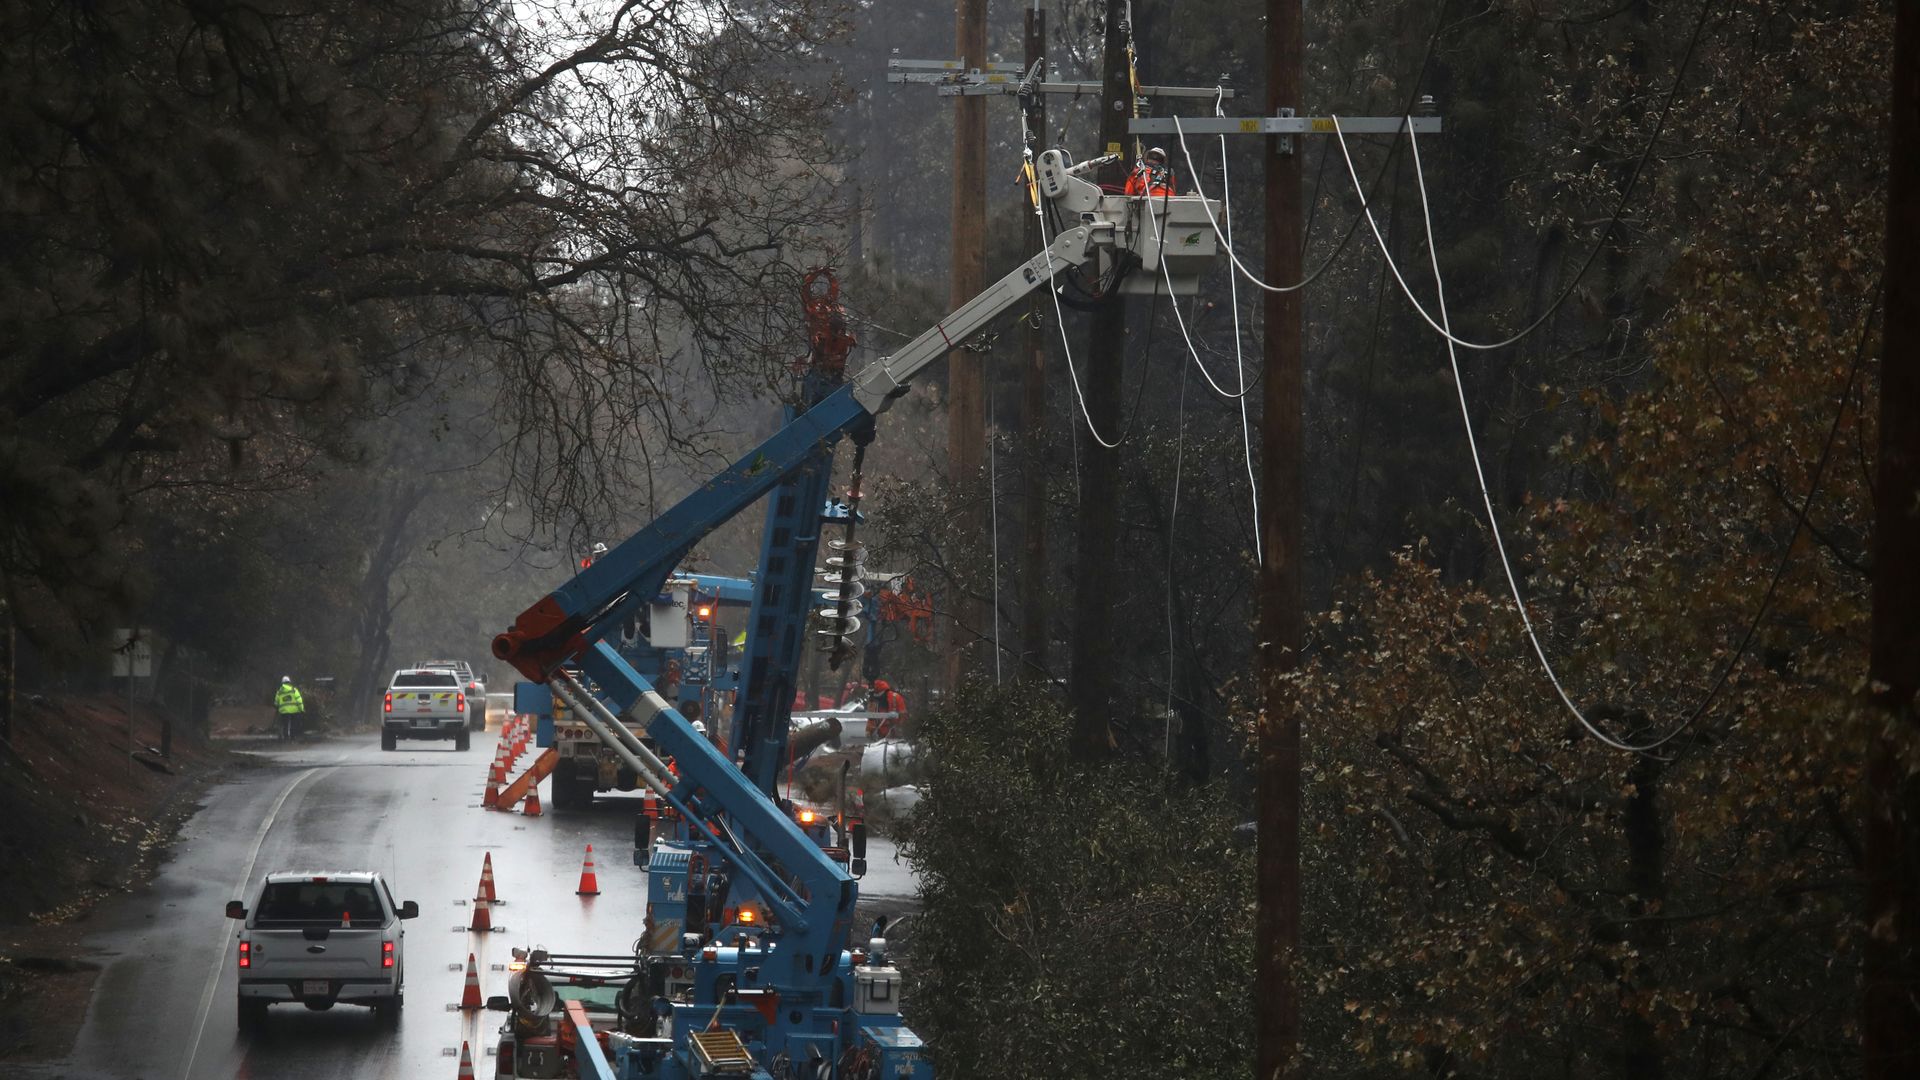 Pacific Gas and Electric (PG&E) crews repair power lines that were destroyed by the Camp Fire